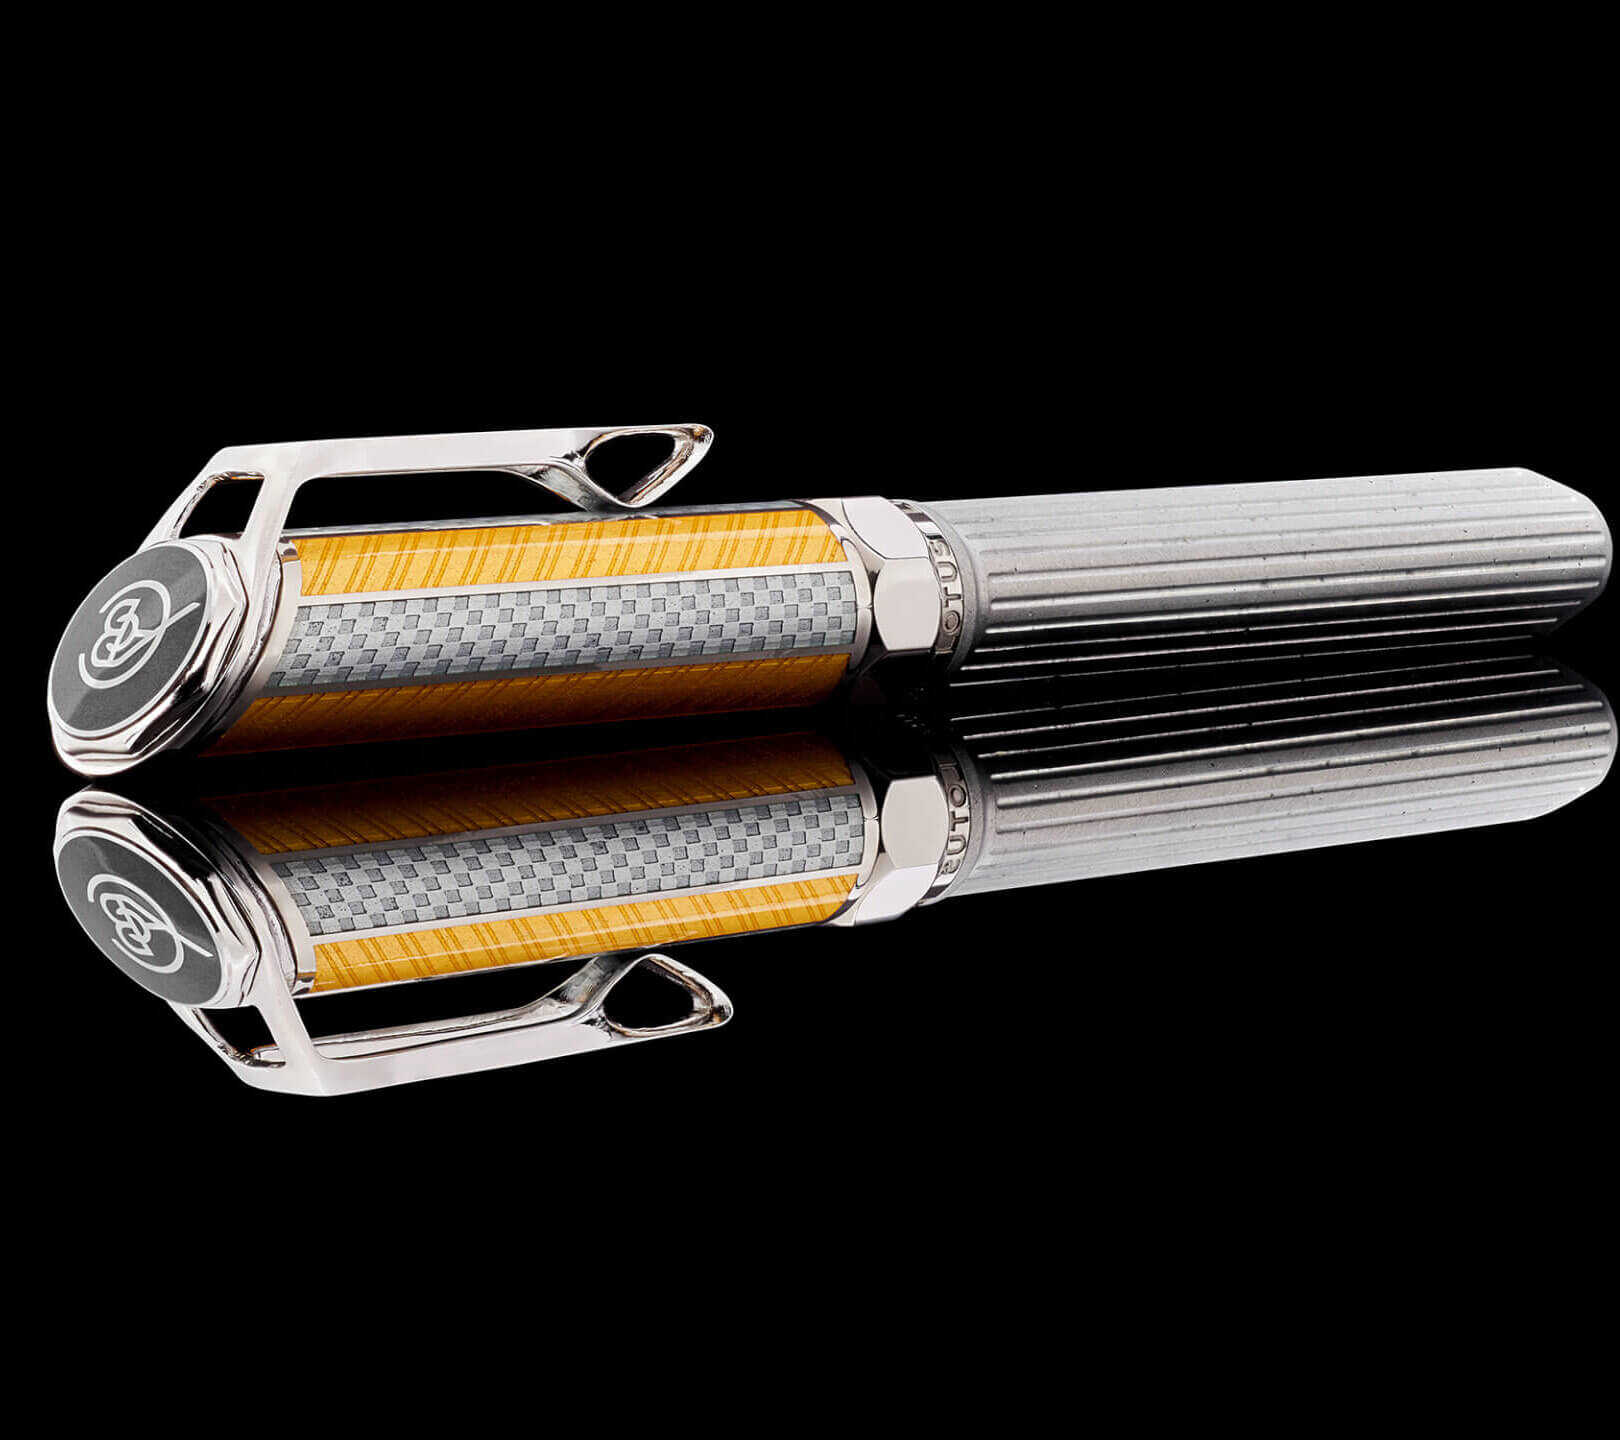 British auto marque Lotus has collaborated with British writing instrument brand Onoto to create an anniversary fountain pen made from the company's Formula One cars. 